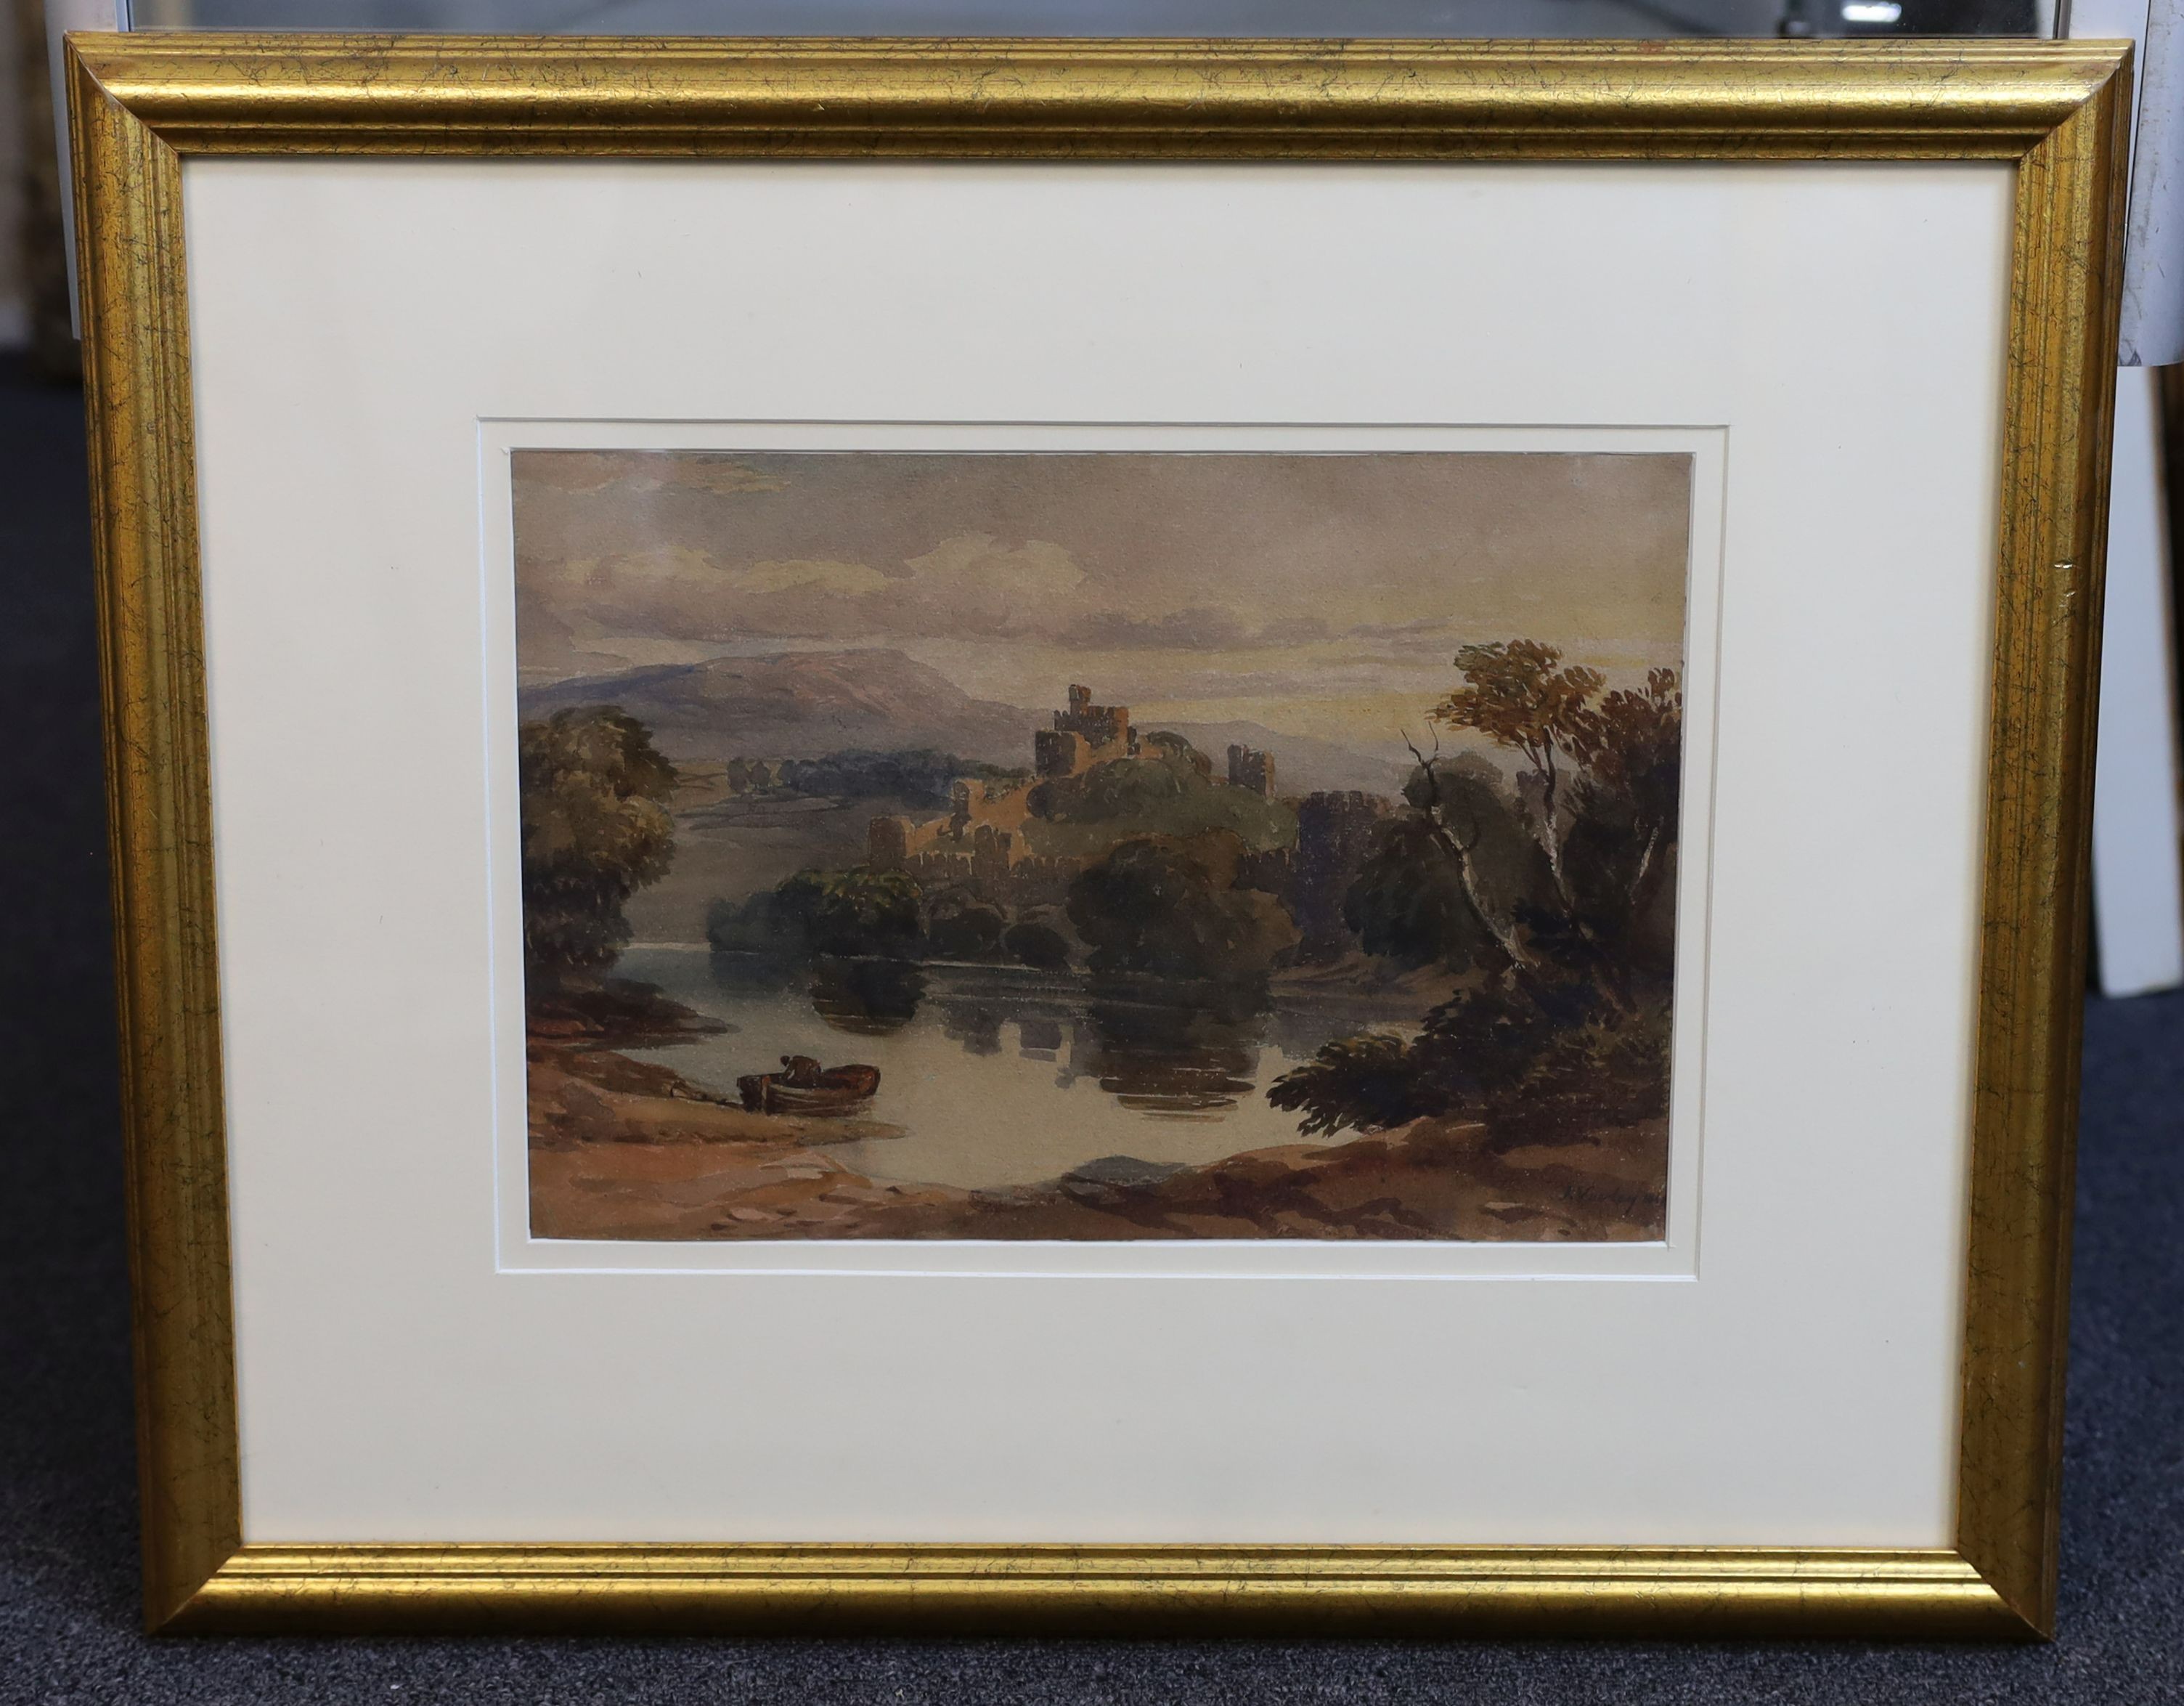 John Varley (1778-1842), watercolour, Castle in a landscape with boatman, signed and dated 1841, 22 x 32.5cm